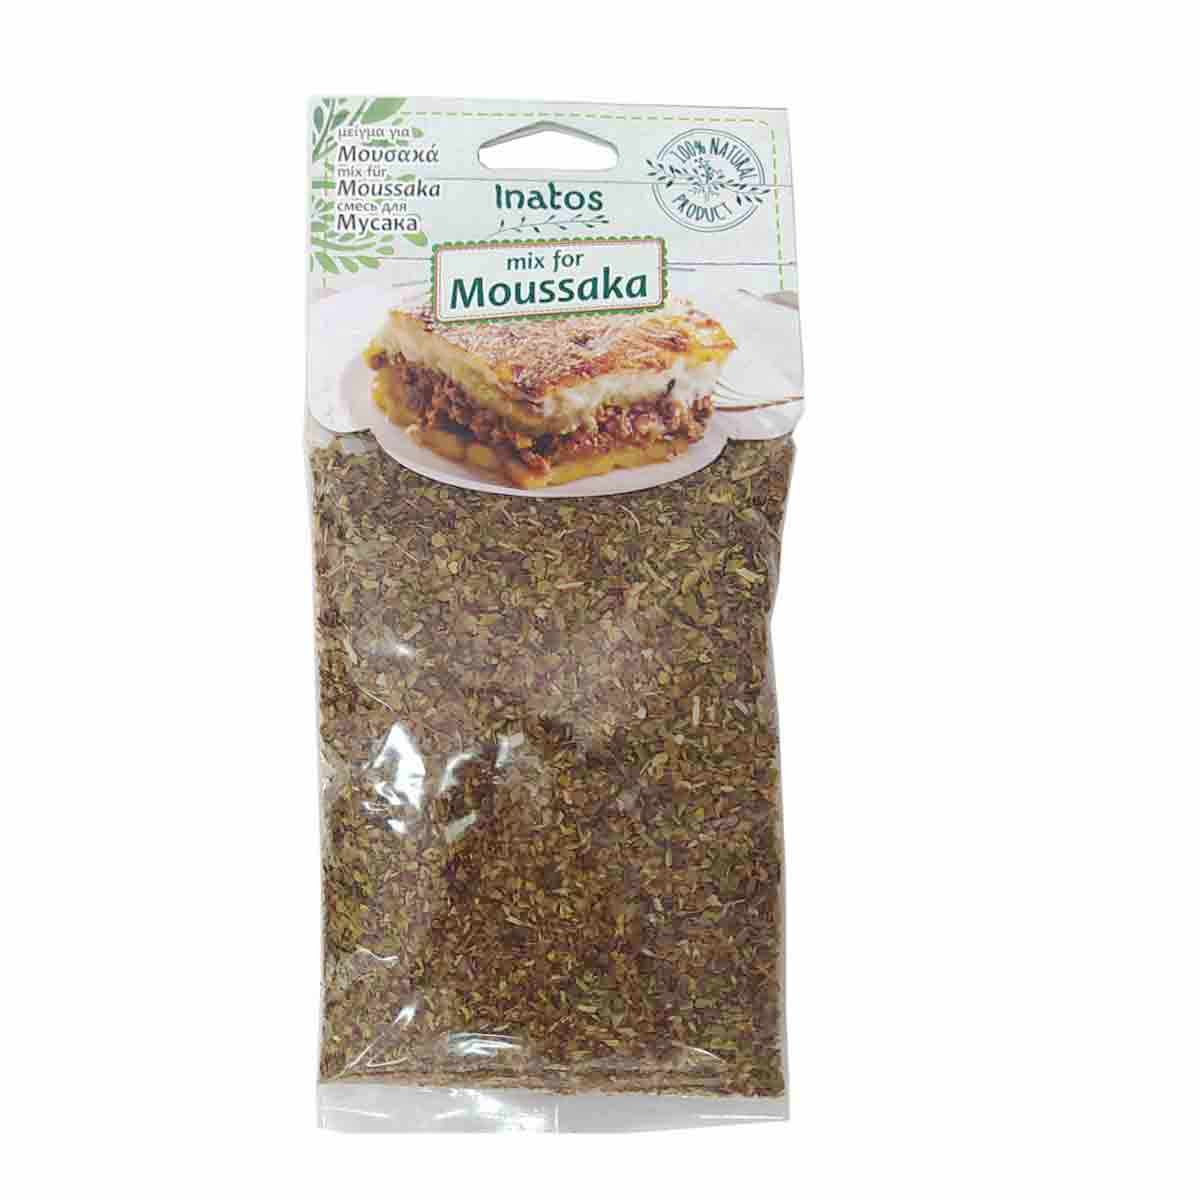 Herb and Spices Blend for Mousaka, 50gr, "Inatos"